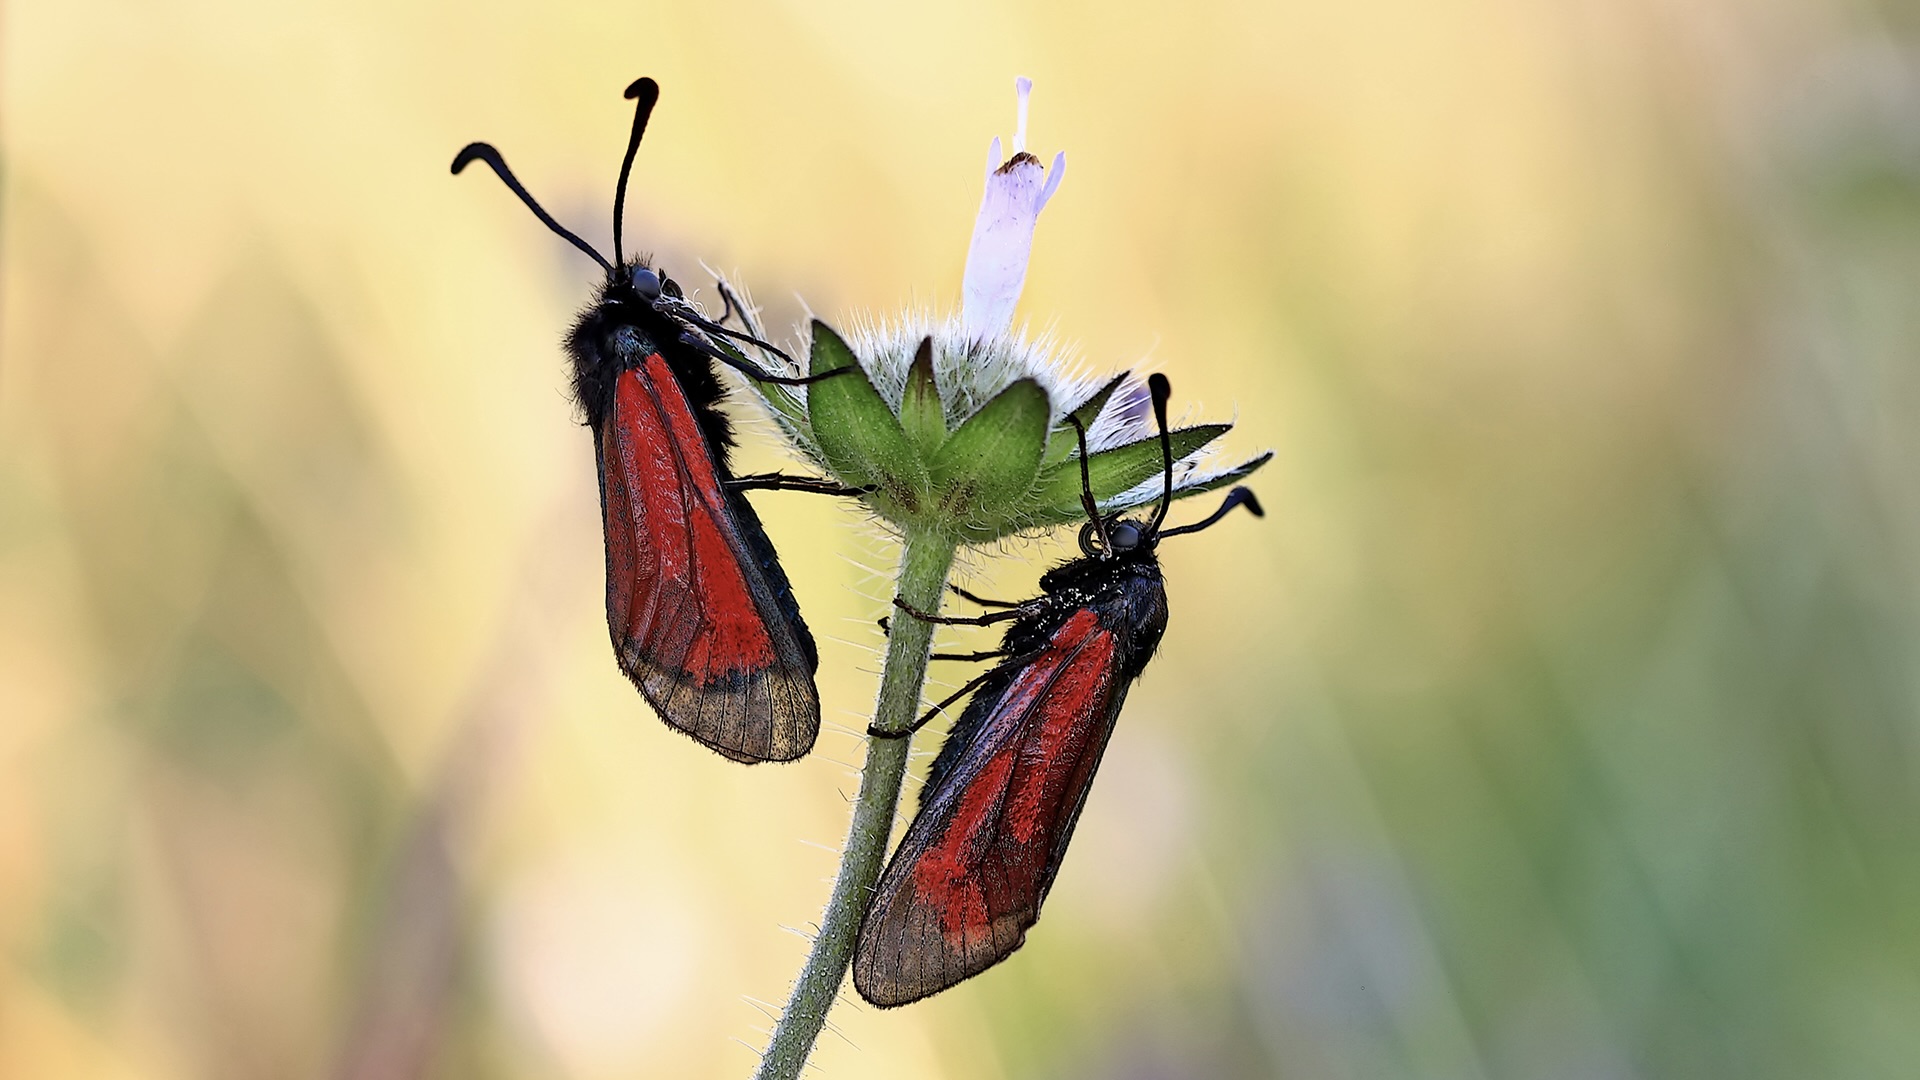 A bugs life: The essential guide for photographing insects